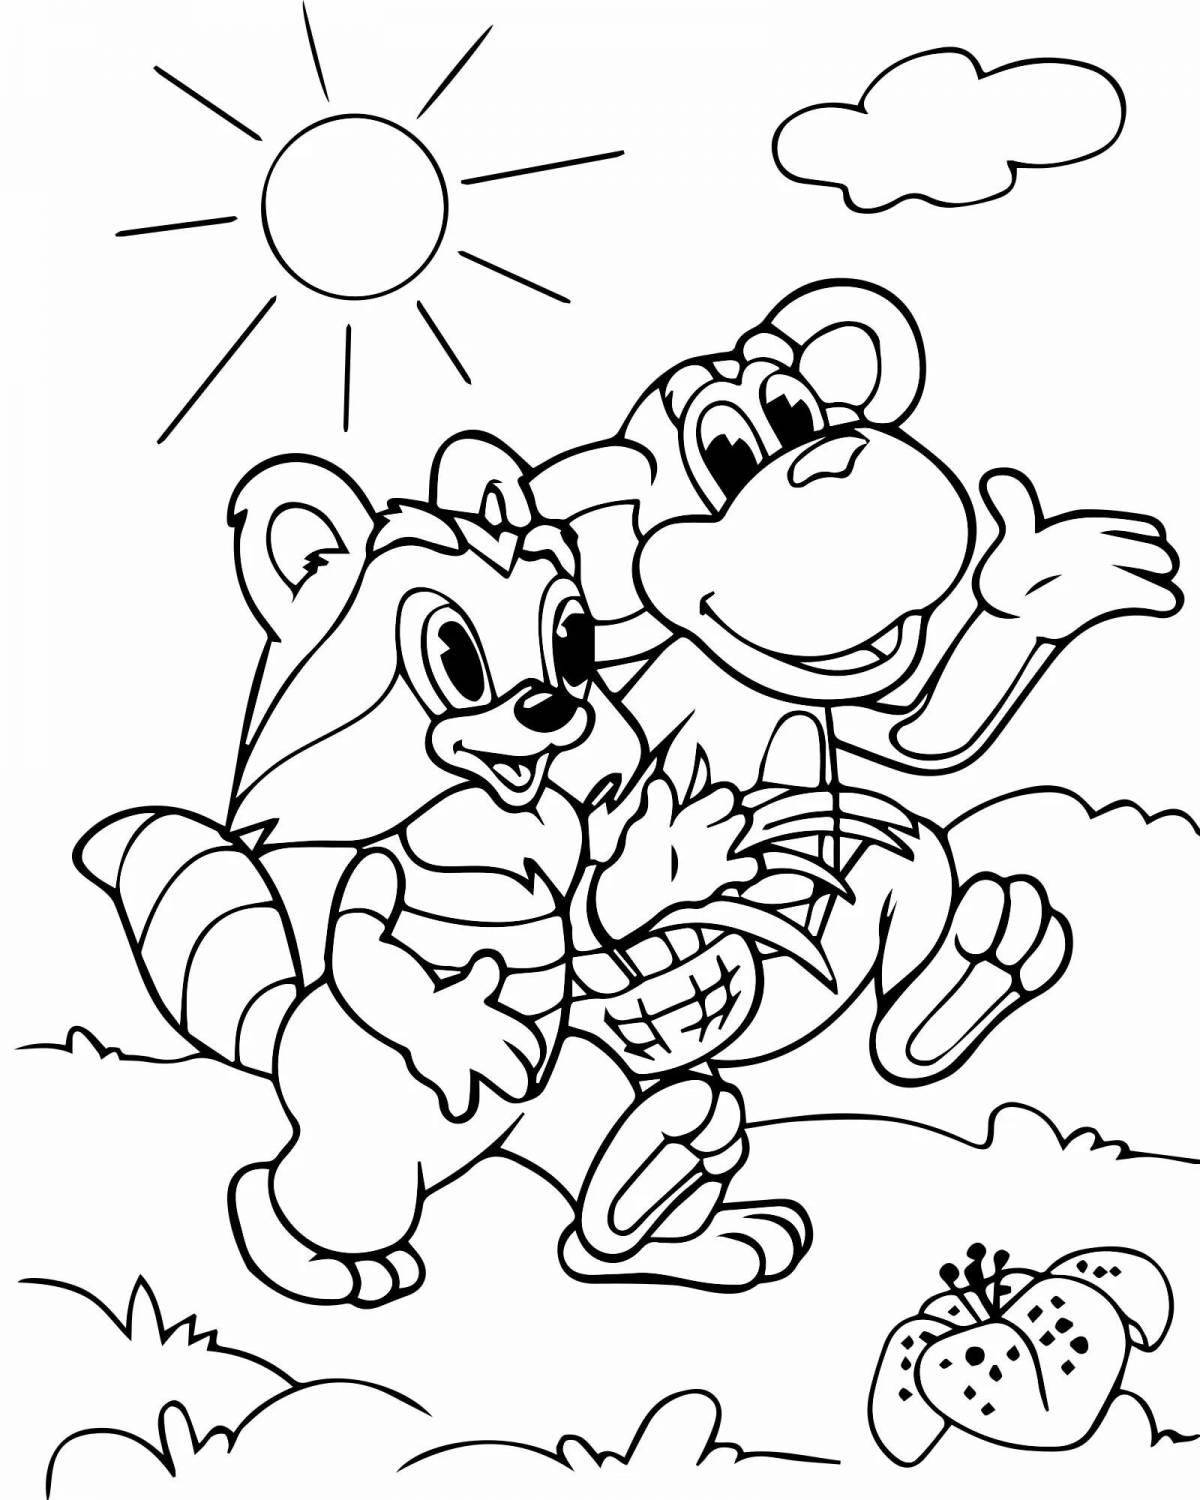 Colorful cartoon adventure coloring book for 3 year olds